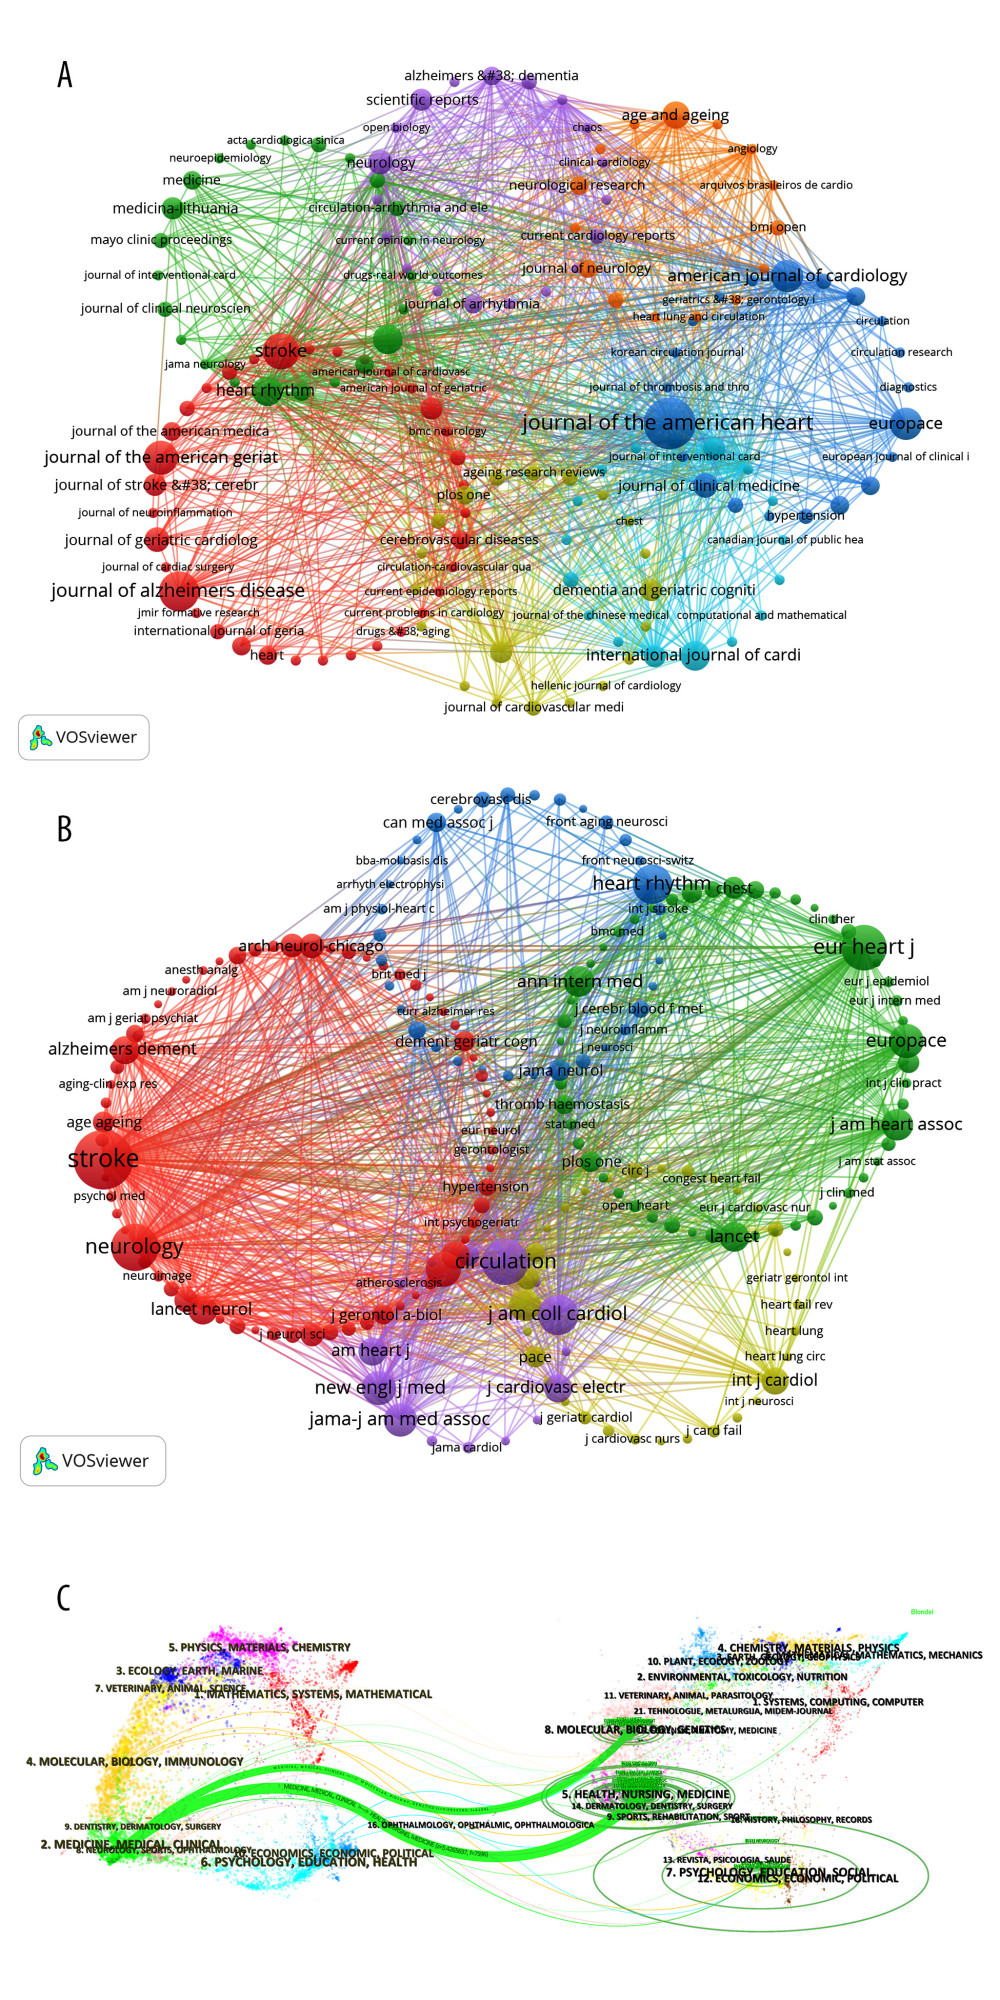 (A) The collaborative network of journals was visualized using VOSviewer for analysis. The nodes, represented by different colors, correspond to journals belonging to distinct clusters, with node size indicating their frequency of occurrence. (B) Analysis of collaborative network visualization of journals’ citations in VOSviewer. The size of the nodes indicates the frequency of their occurrence. (C). The dual-map overlay of journals on research of AF and dementia. Figures A and B were generated using VOSviewer software (version 1.6.17), while Figure C was constructed using CiteSpace software (version 6.2. R3).